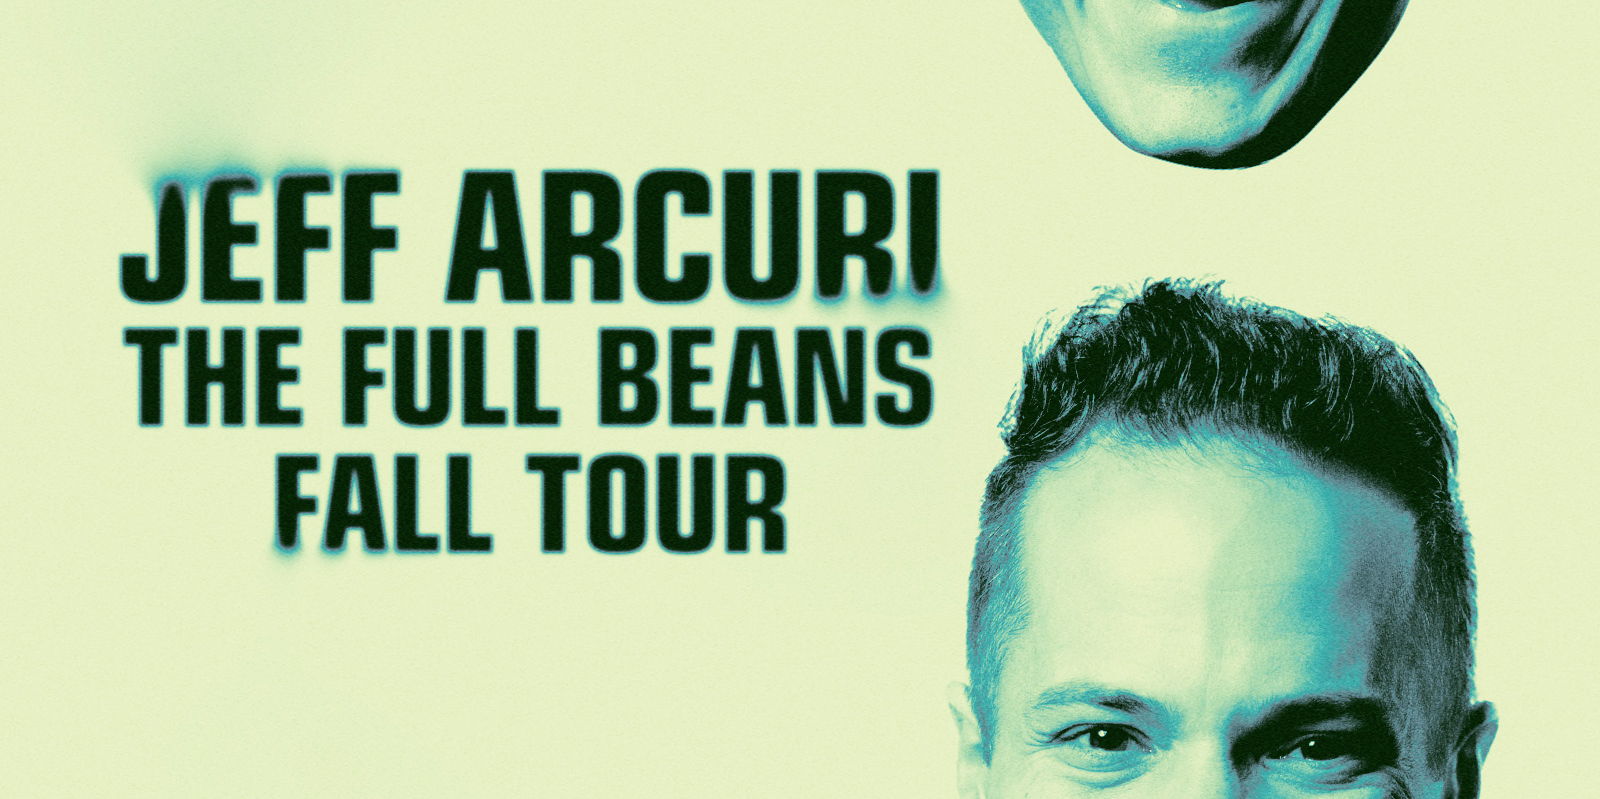 Jeff Arcuri | The Full Beans Fall Tour promotional image